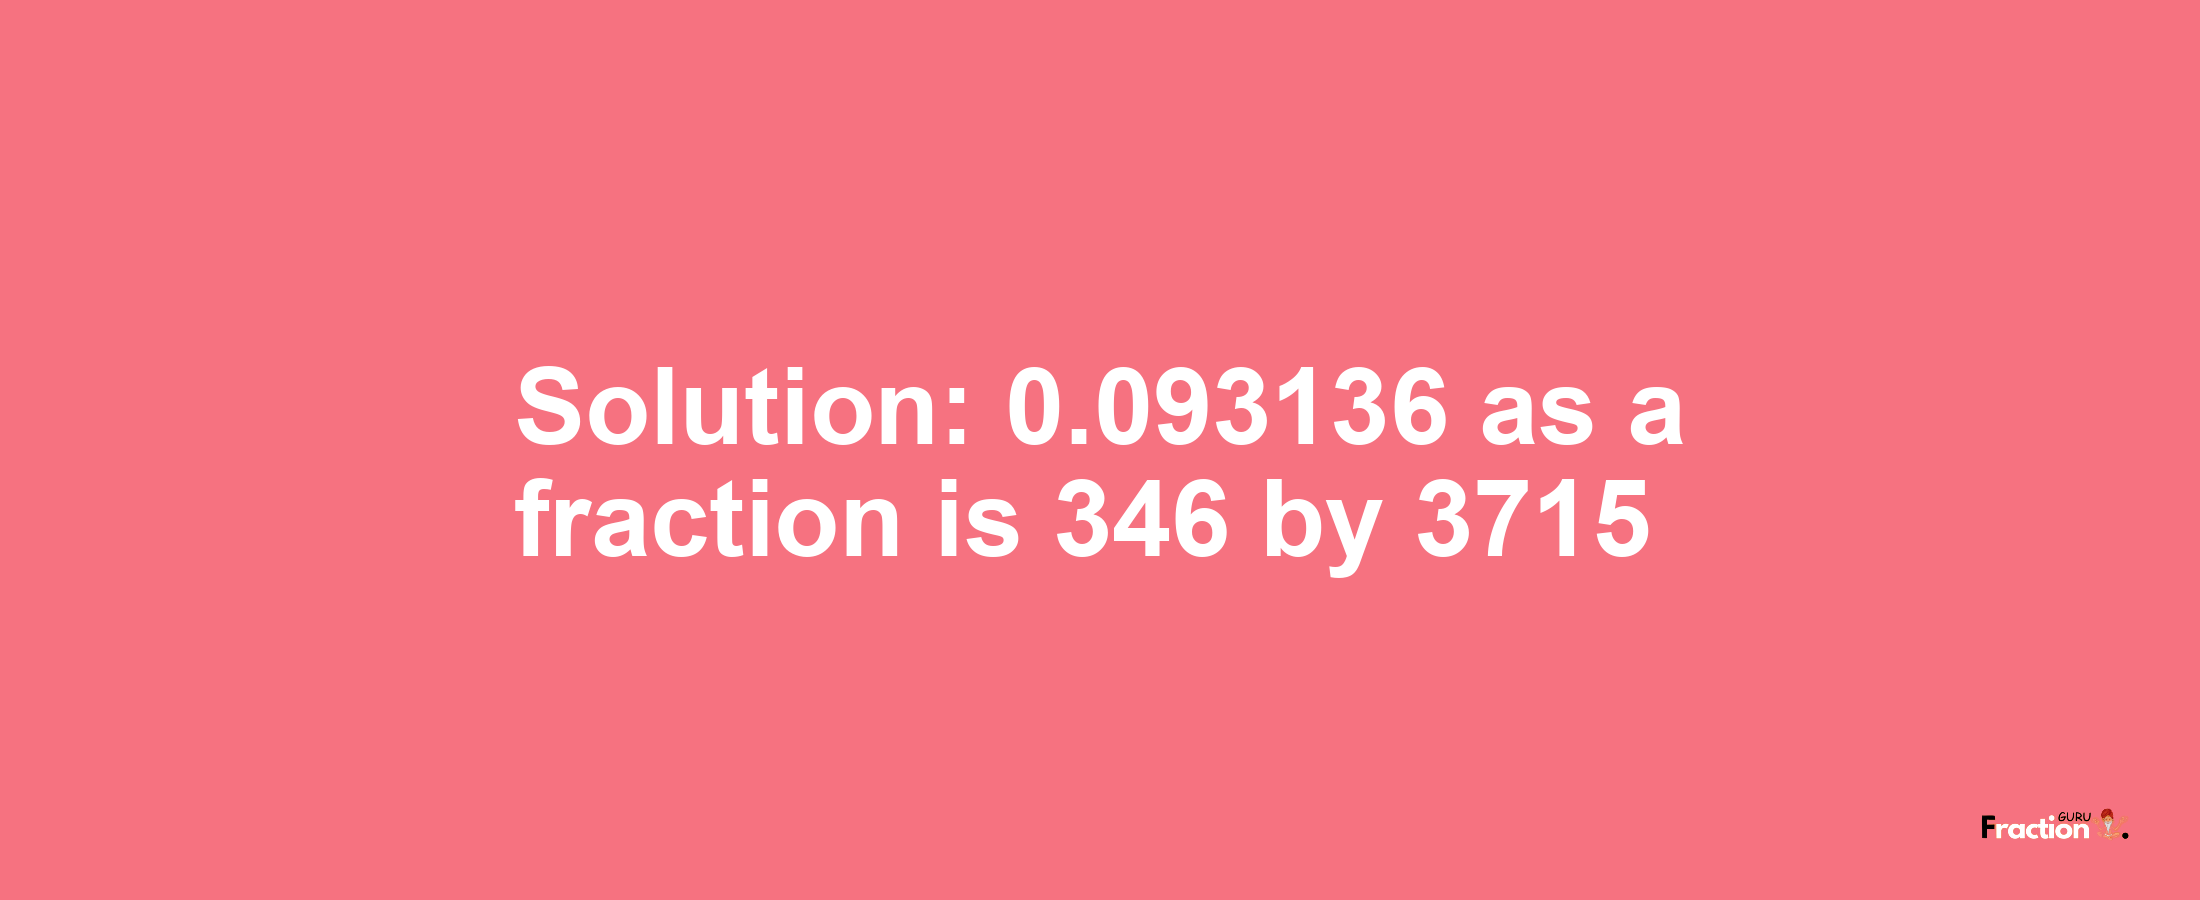 Solution:0.093136 as a fraction is 346/3715